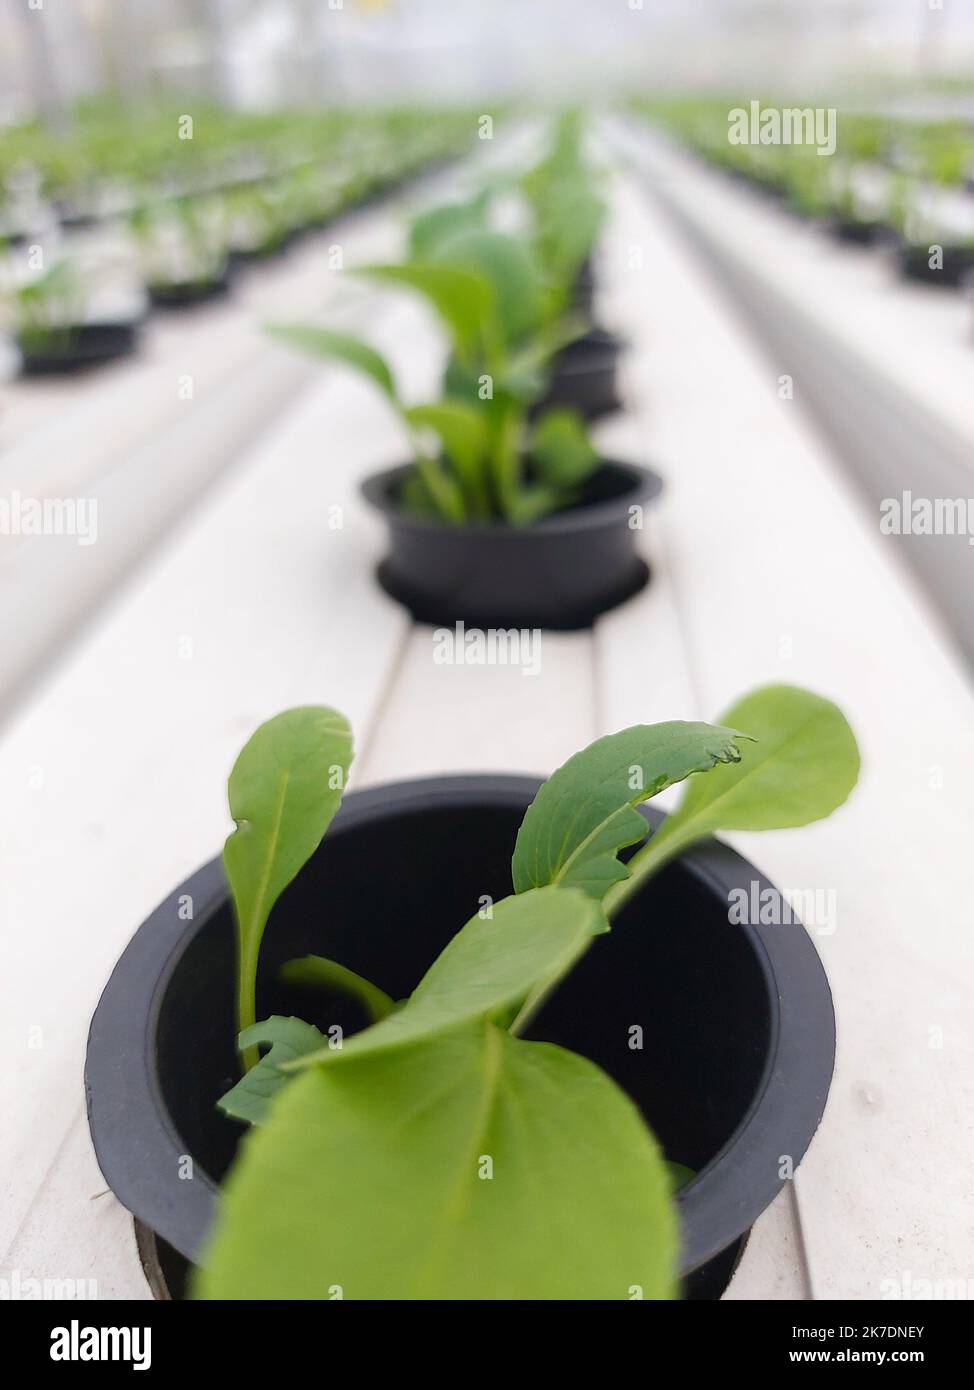 Selective focus of hydroponic lettuce plant on blurred background. Its scientific name is Lactuca sativa var angustana. Stock Photo